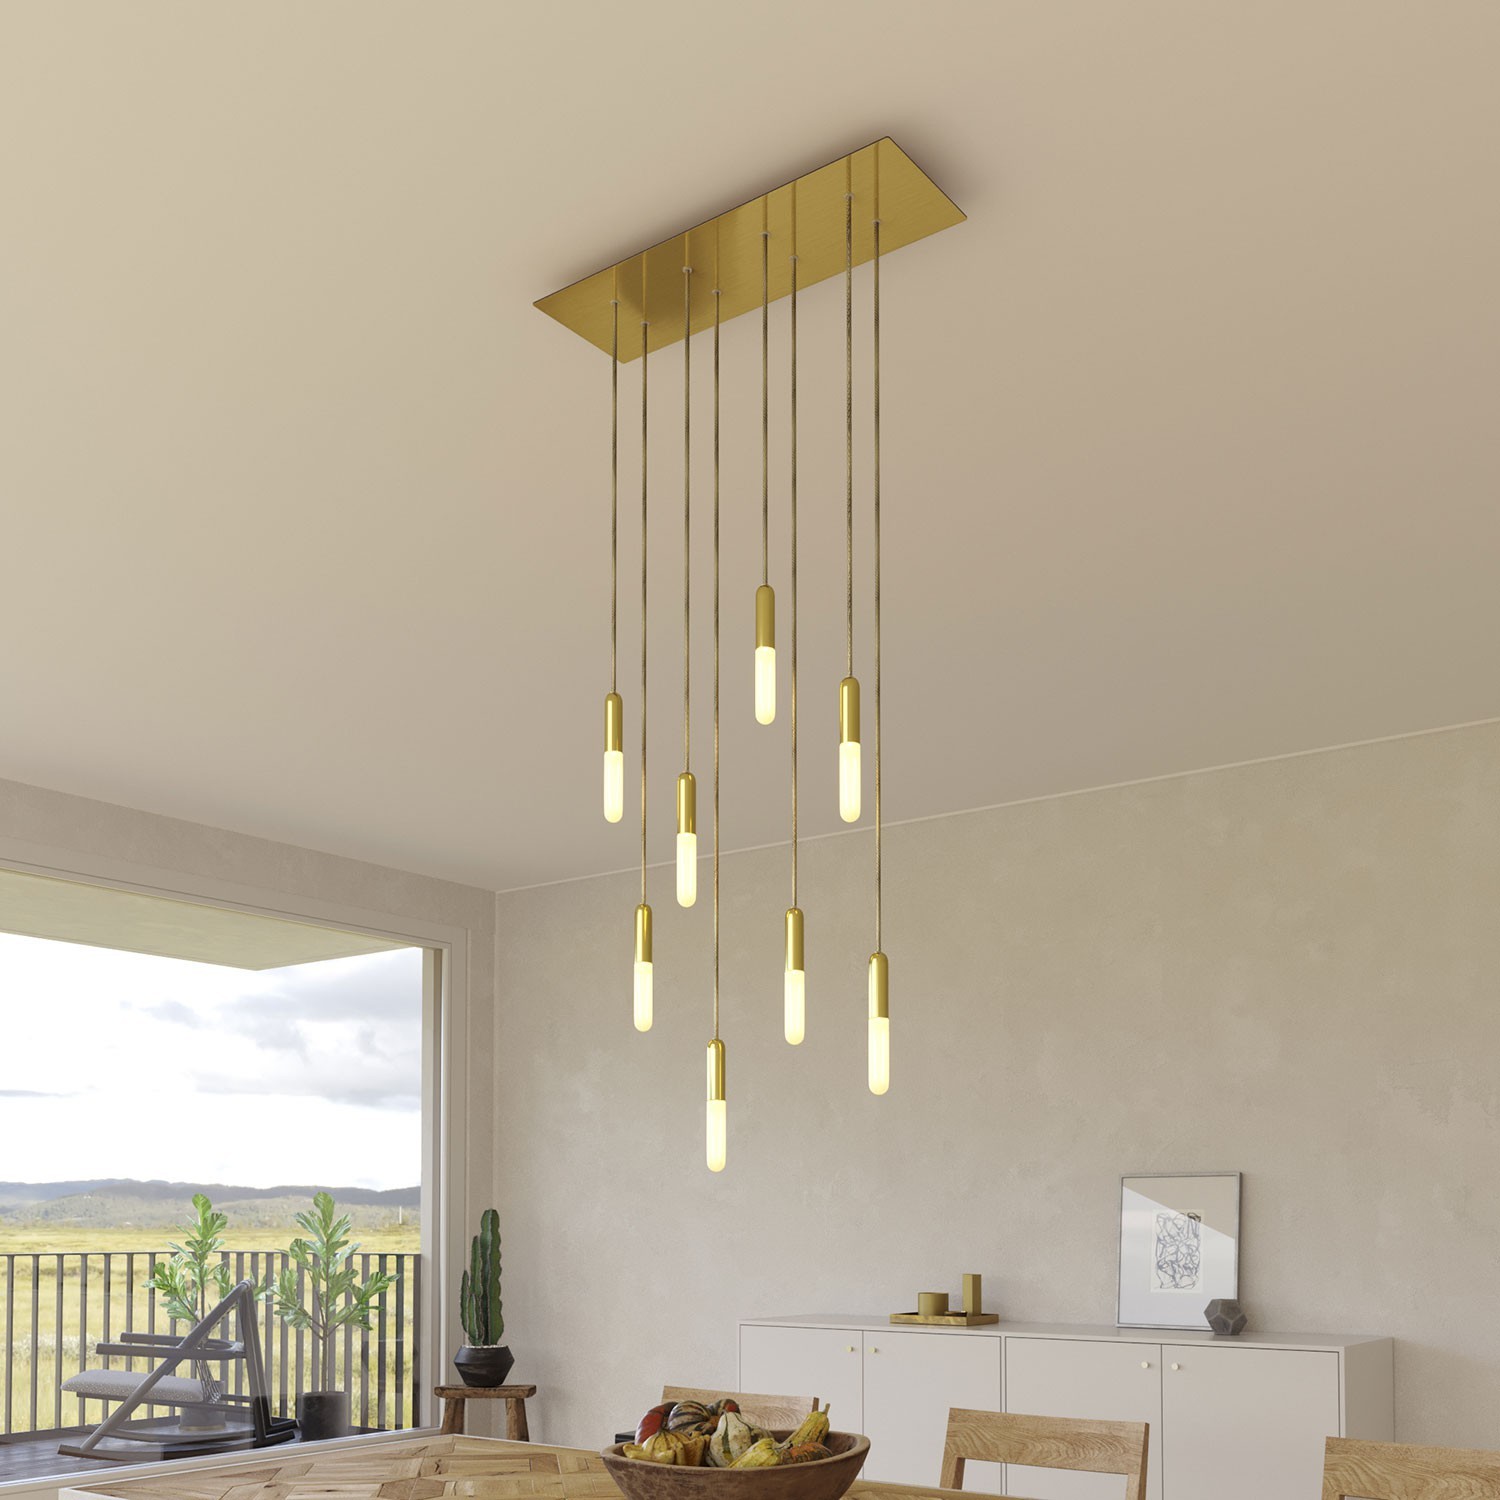 8-light pendant lamp with 675 mm rectangular XXL Rose-One, featuring fabric cable and metal finishes